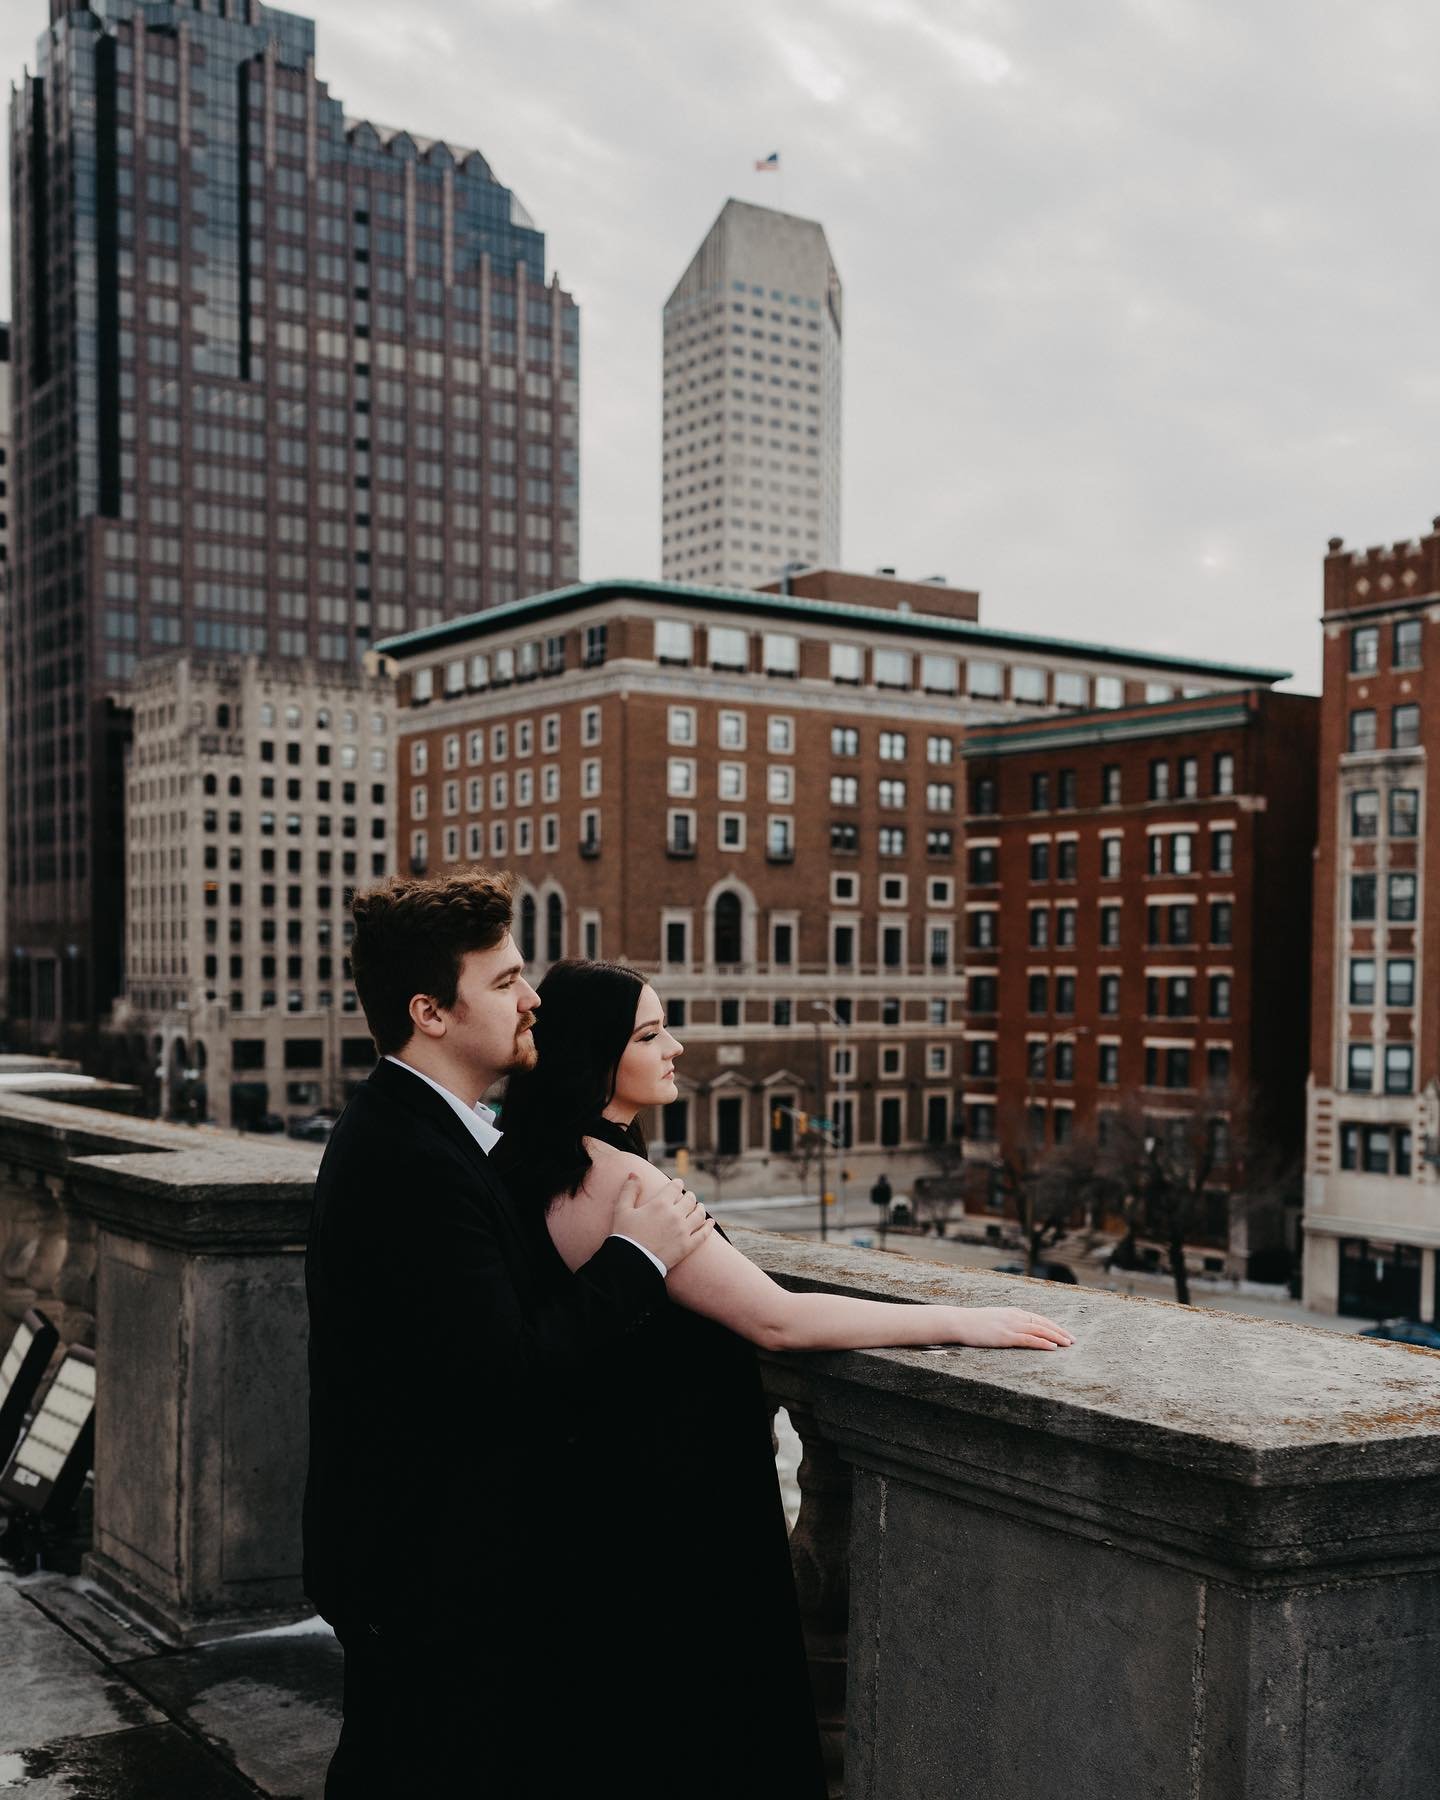 some big city love love love ❤️&zwj;🔥

Did you know that when you book a wedding with me, it always includes a complimentary engagement photo session? 

Why? 

I want to get to know you &amp; your fianc&eacute;!!!! It&rsquo;s so much fun to hangout,